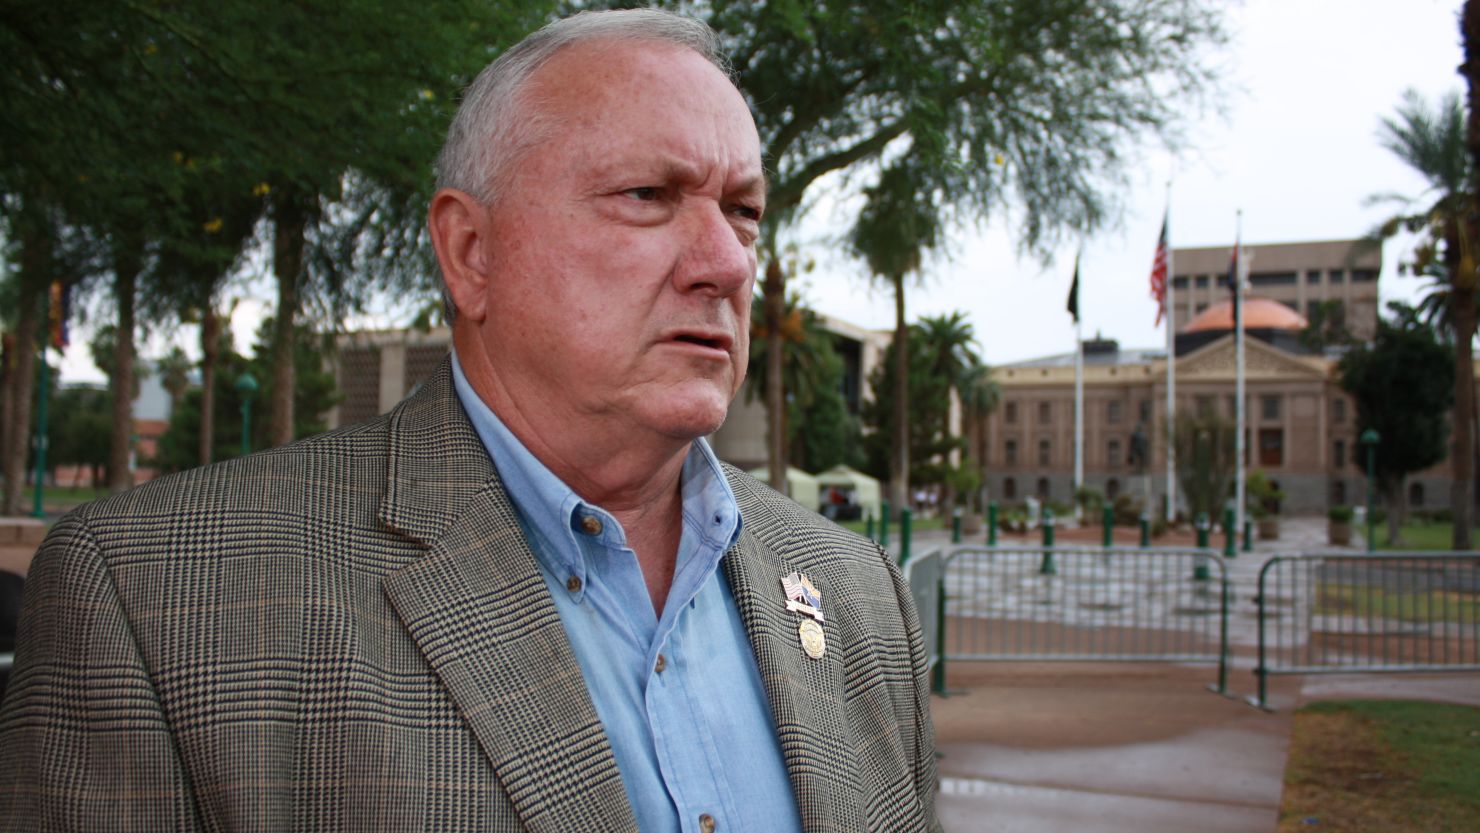 Arizona state Sen. Russell Pearce is known for his tough stance against illegal immigration and a state law to prevent it.